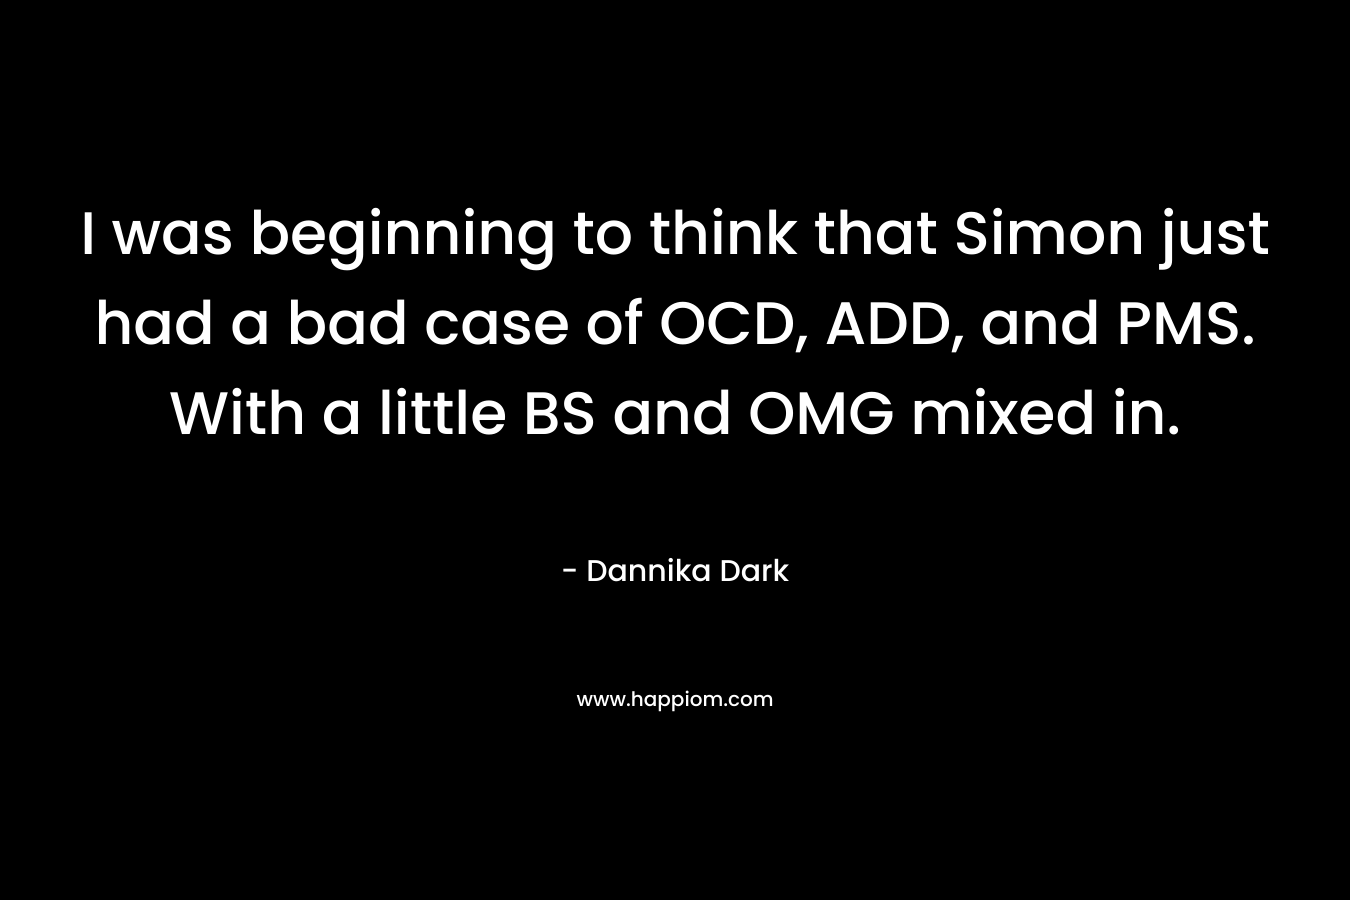 I was beginning to think that Simon just had a bad case of OCD, ADD, and PMS. With a little BS and OMG mixed in.